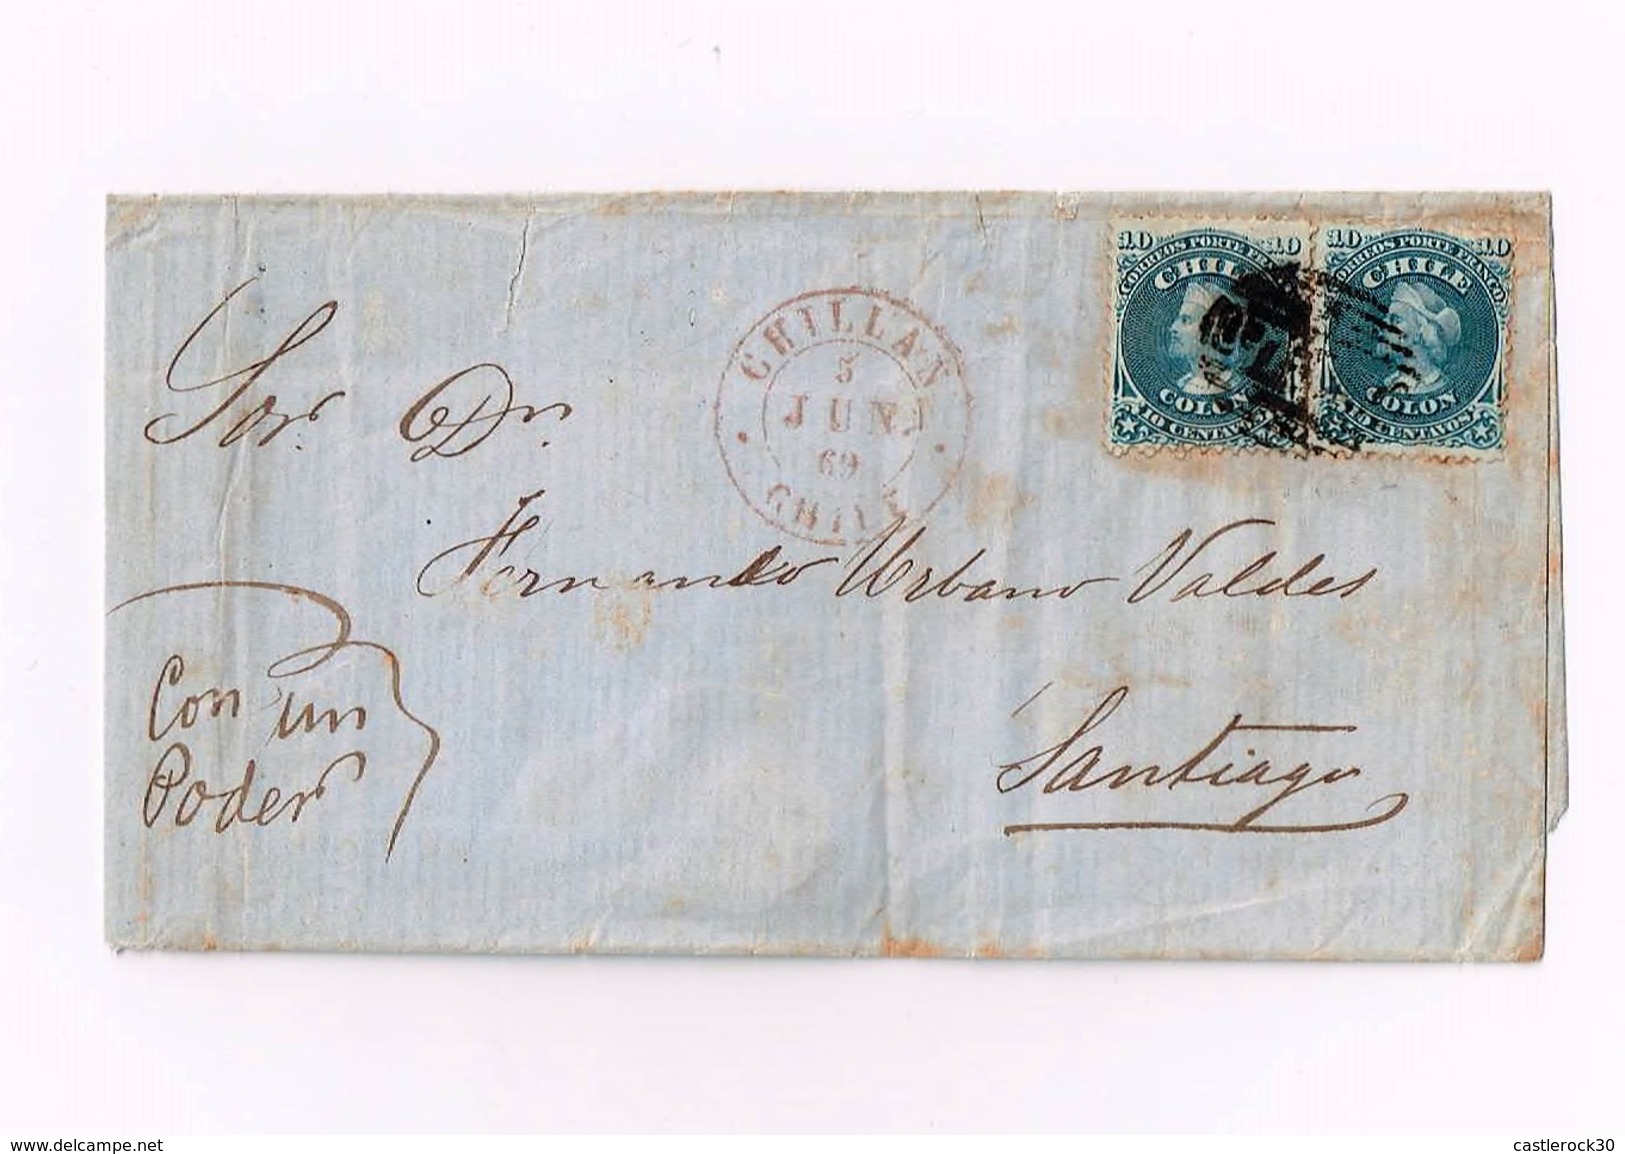 R) 1869 CHILE, CHILLAN TO SANTIAGO, SEALS OF 10 CENTS BLUE (2) 5C 18 TRIPLE RATE VIA CANO - Chile